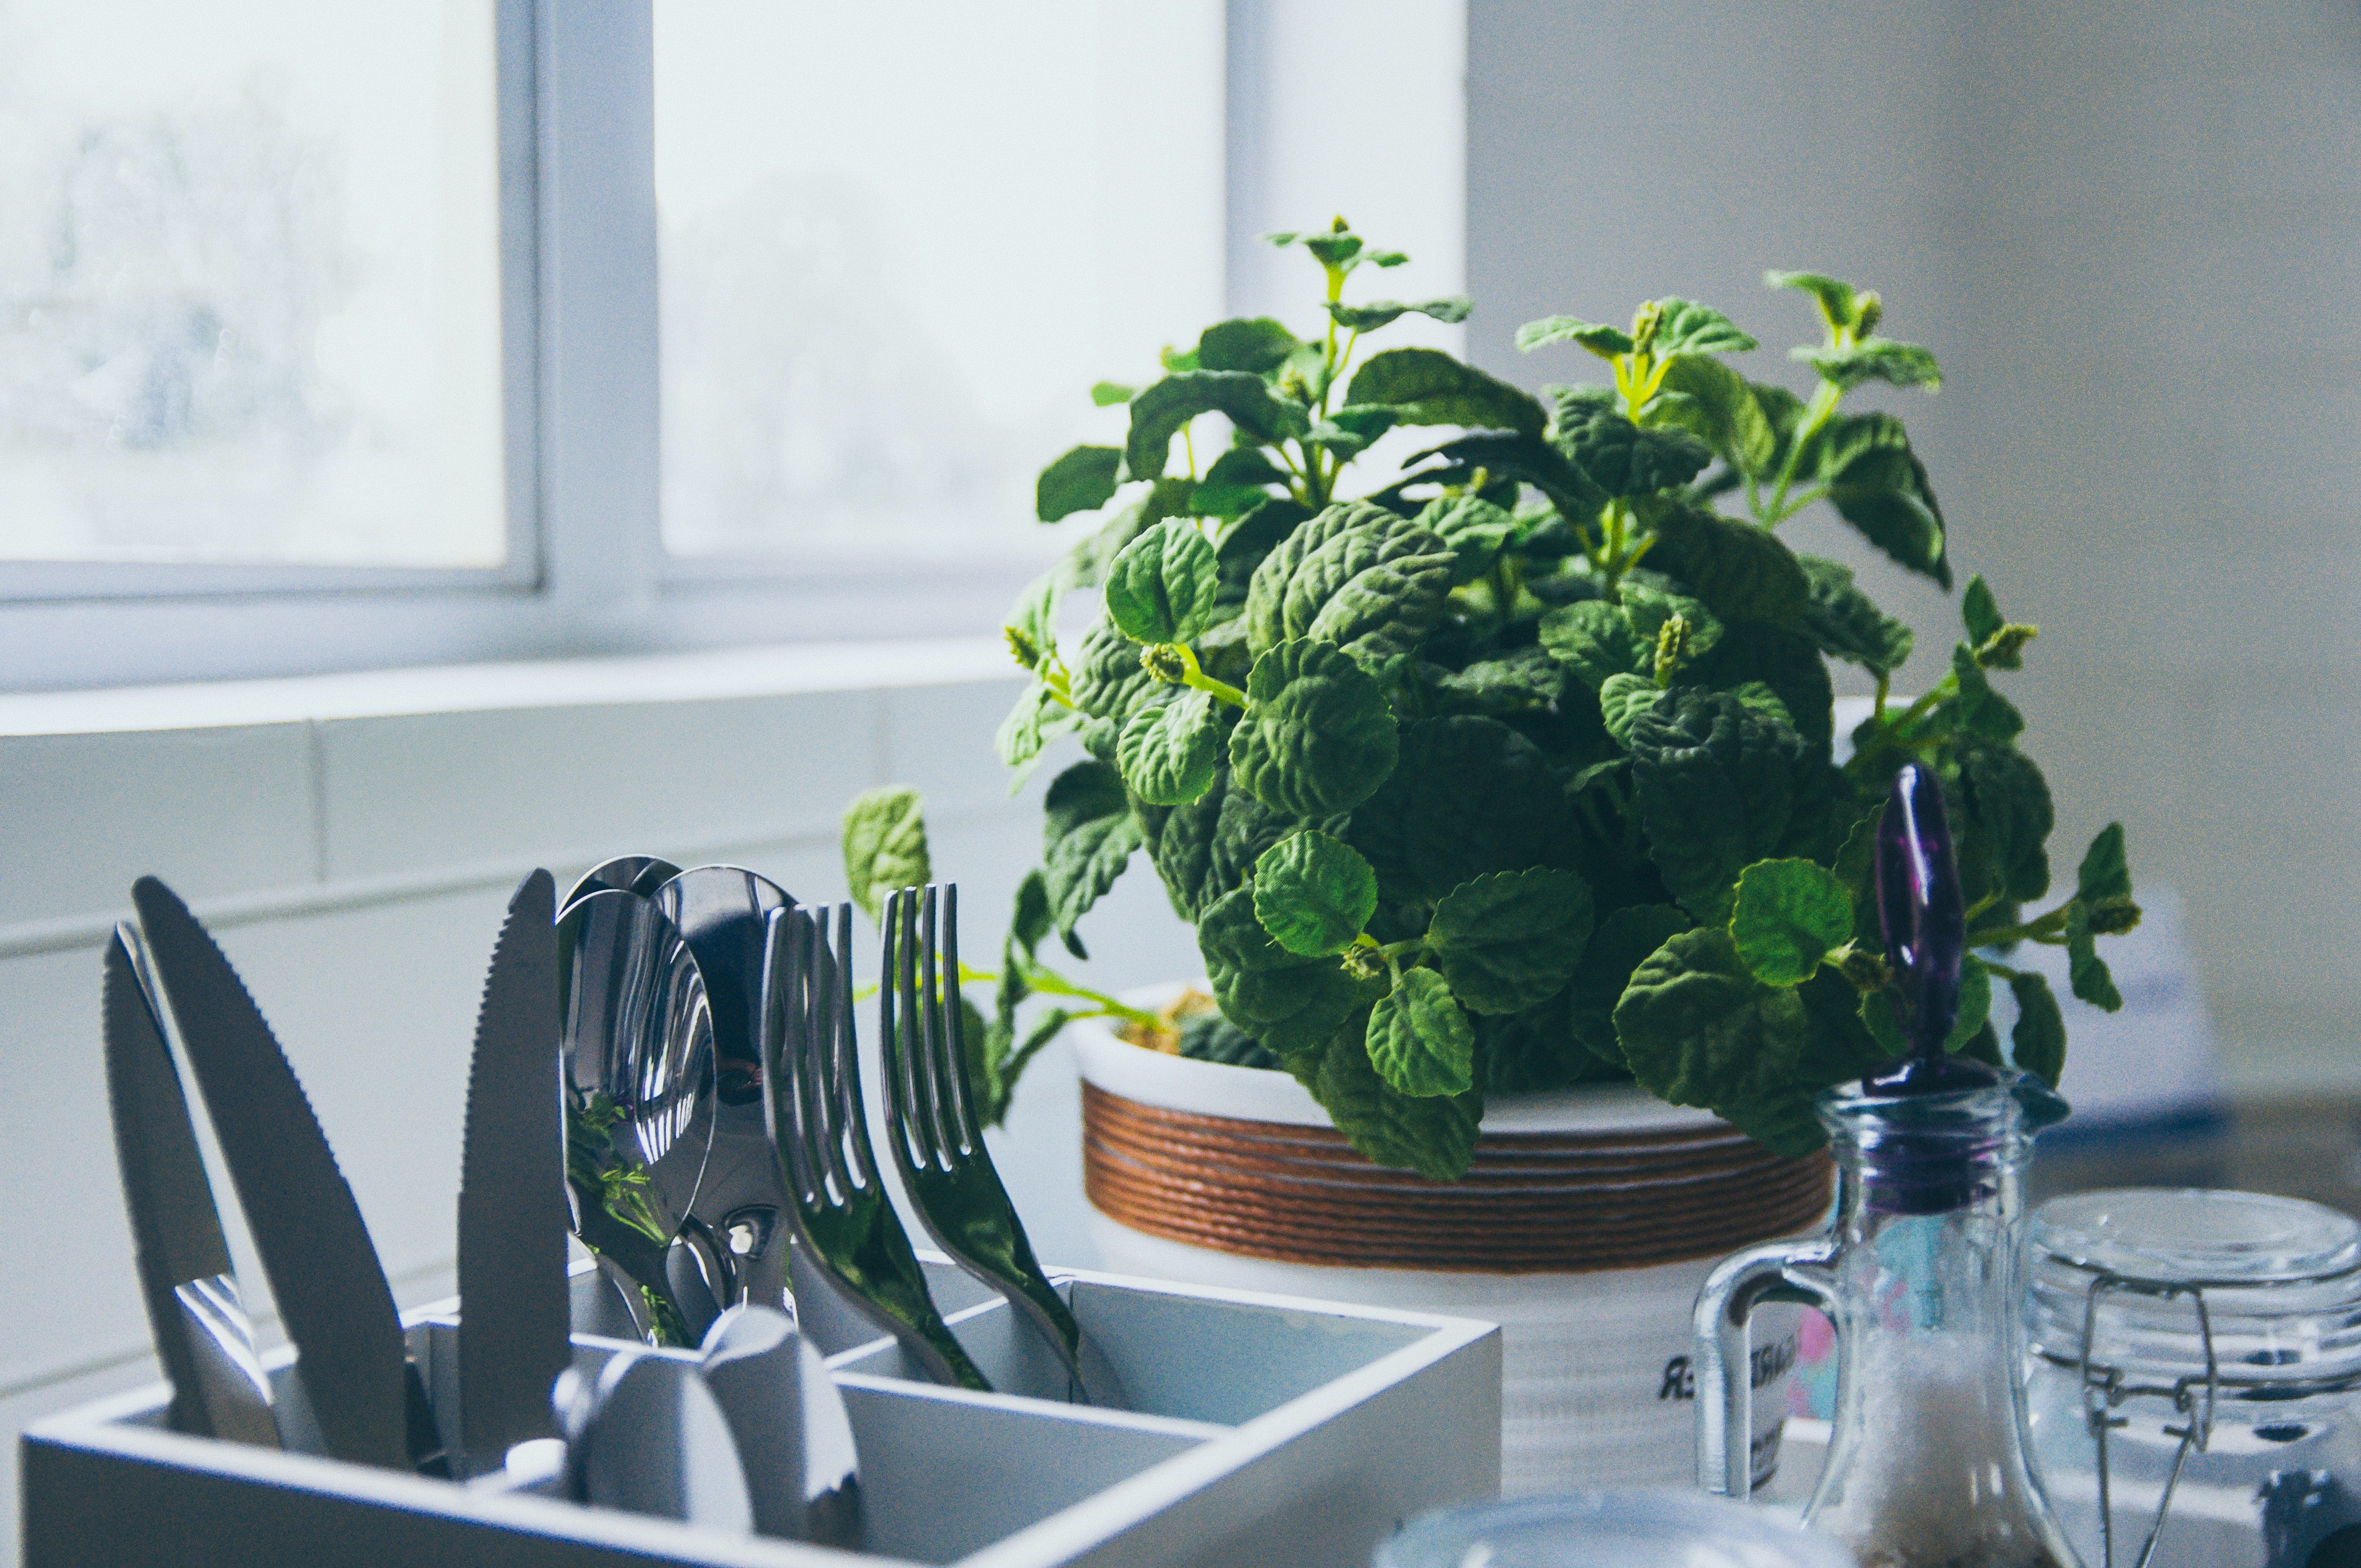 Mint plants can grow indoors or in the kitchen